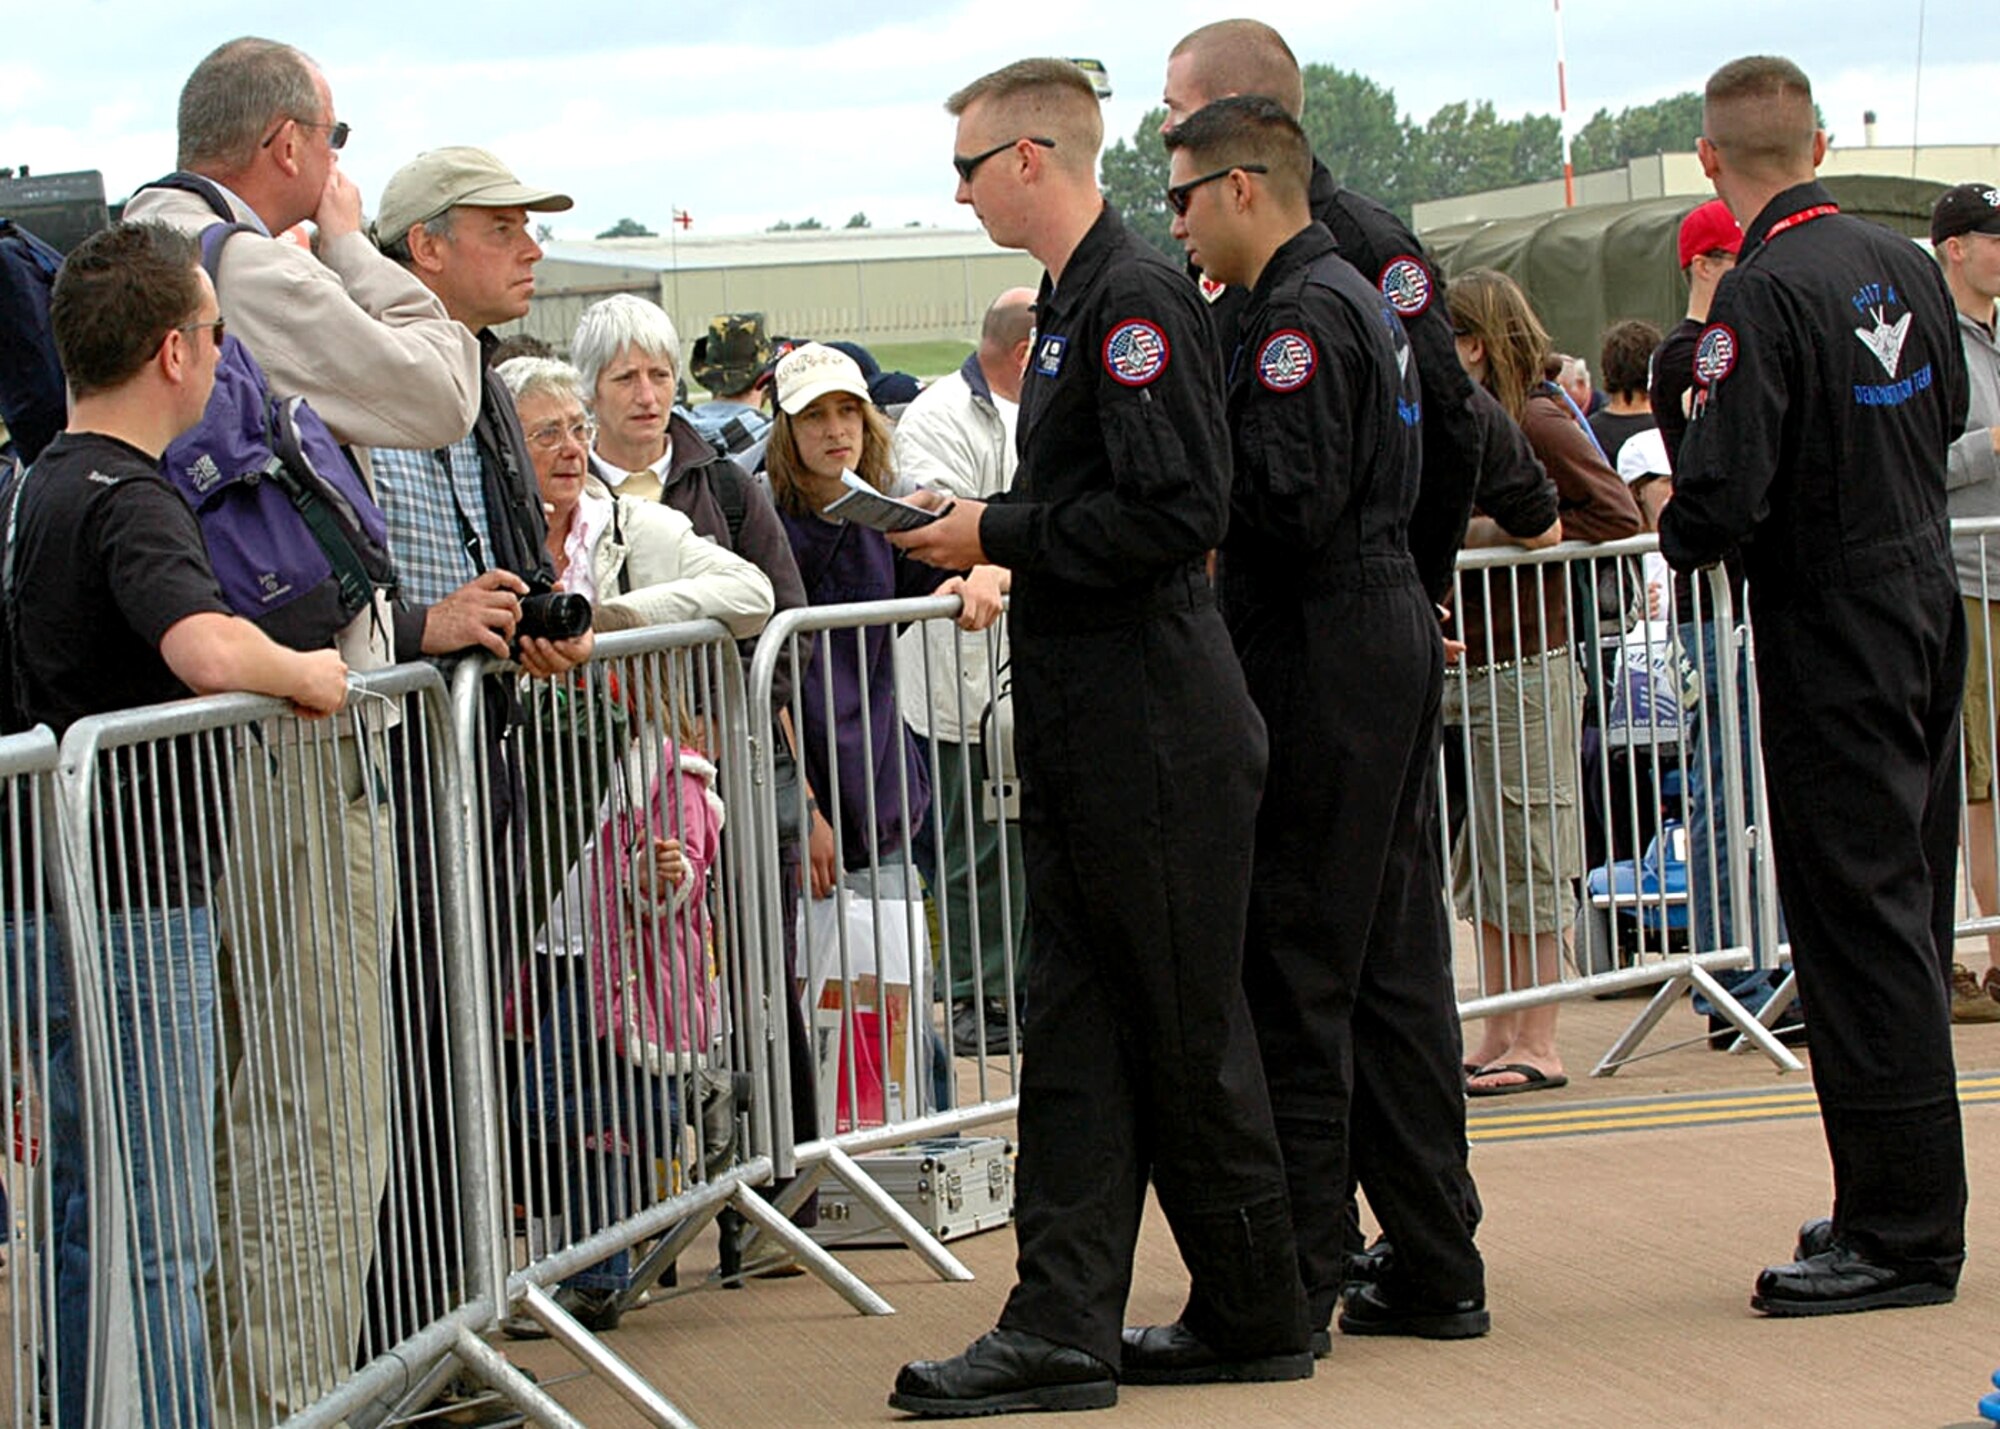 F-117 Demonstration Team members Staff Sgts. Jason Yeargin, Oscar Vega, Jody Daniels and Brian Donovan answer questions, have their picturs taken and sign autographs for throngs of spectators who flocked around the Nighthawk static display July 14 during the Royal International Air Tatoo at Fairford, United Kingdom. Holloman sent two F-117As and a 22-person team of pilots and support crew to the international air show. (U.S. Air Force photo/ Mr. Tommy Fuller)